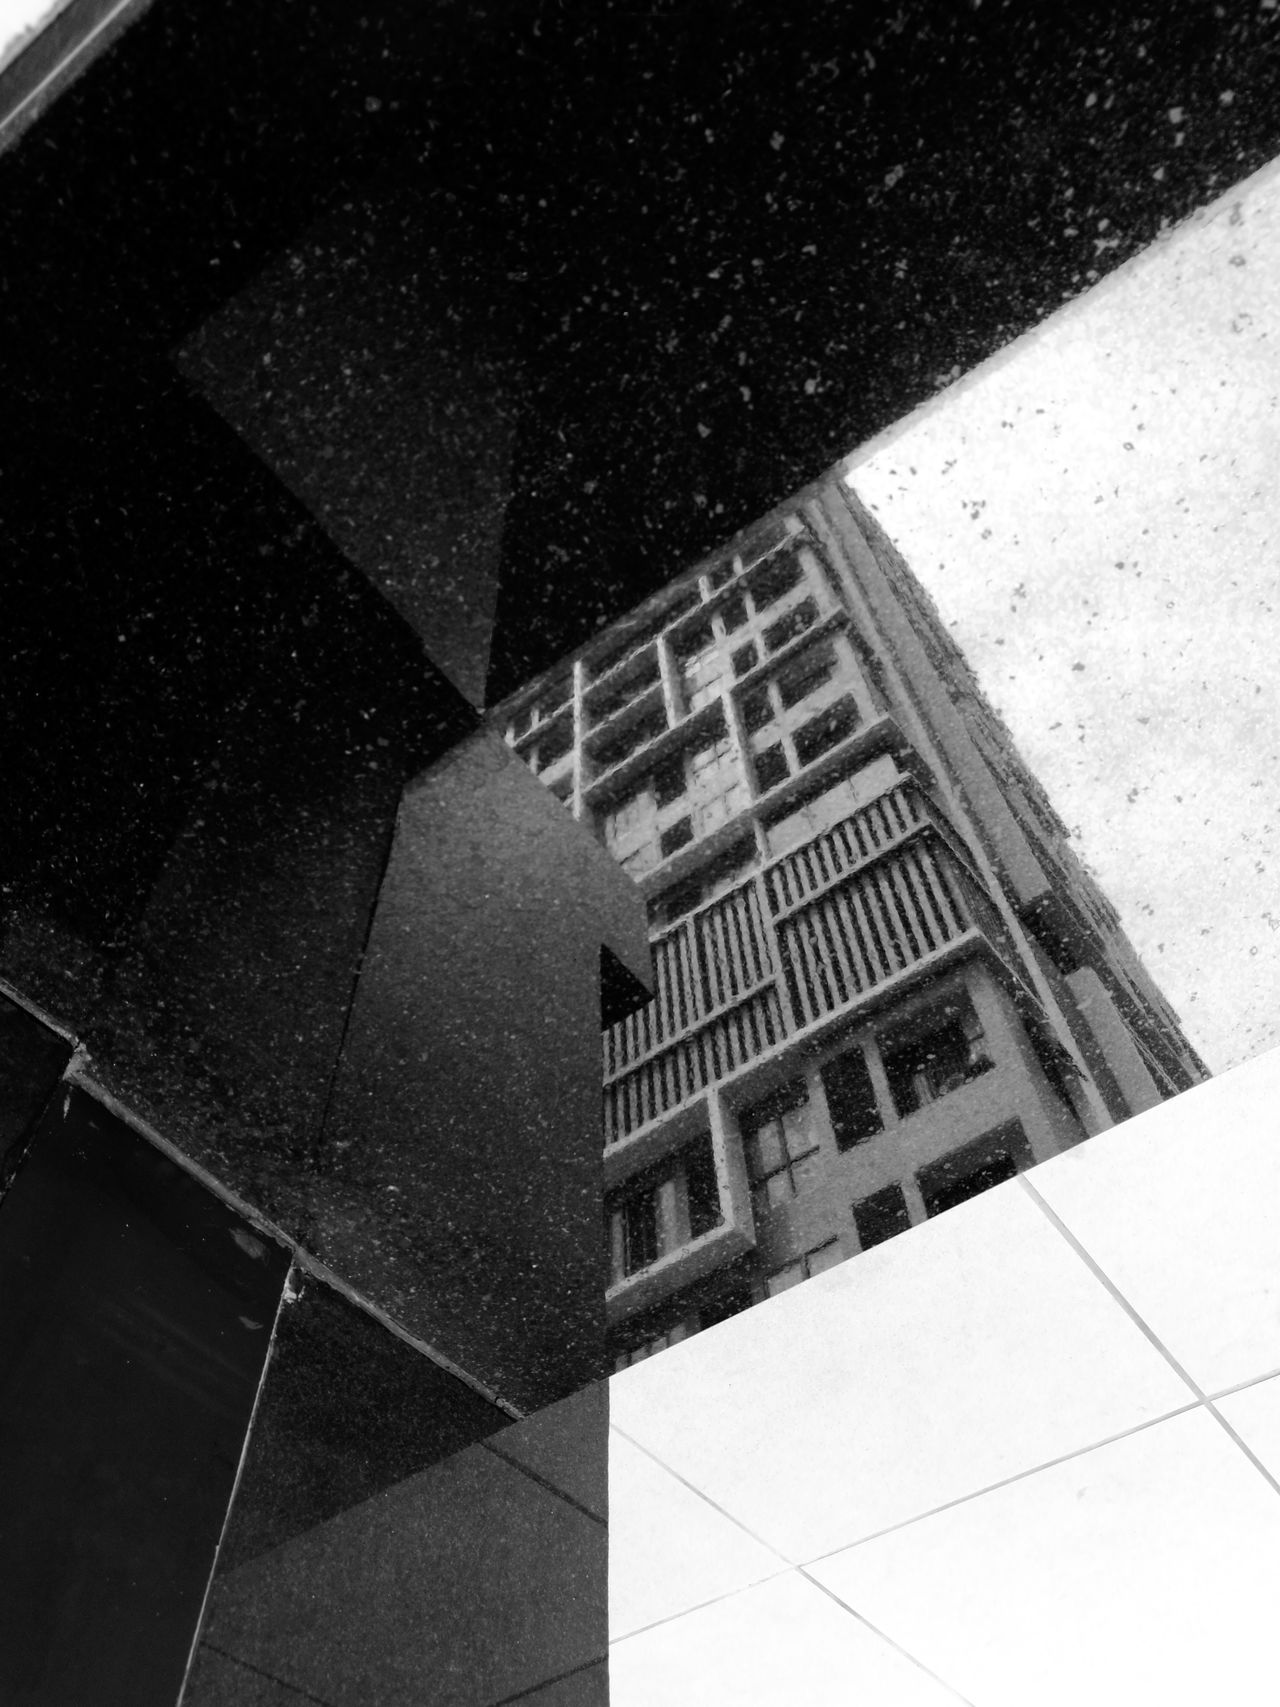 Fine Art Photography ant eyes view ant view Architecture buildings & sky built structure City City Life cityscapes close-up Composition day Dimensions elevated view lines and shapes Mirror Modern monochrome no people outdoors Perspective Reflection sky Ti